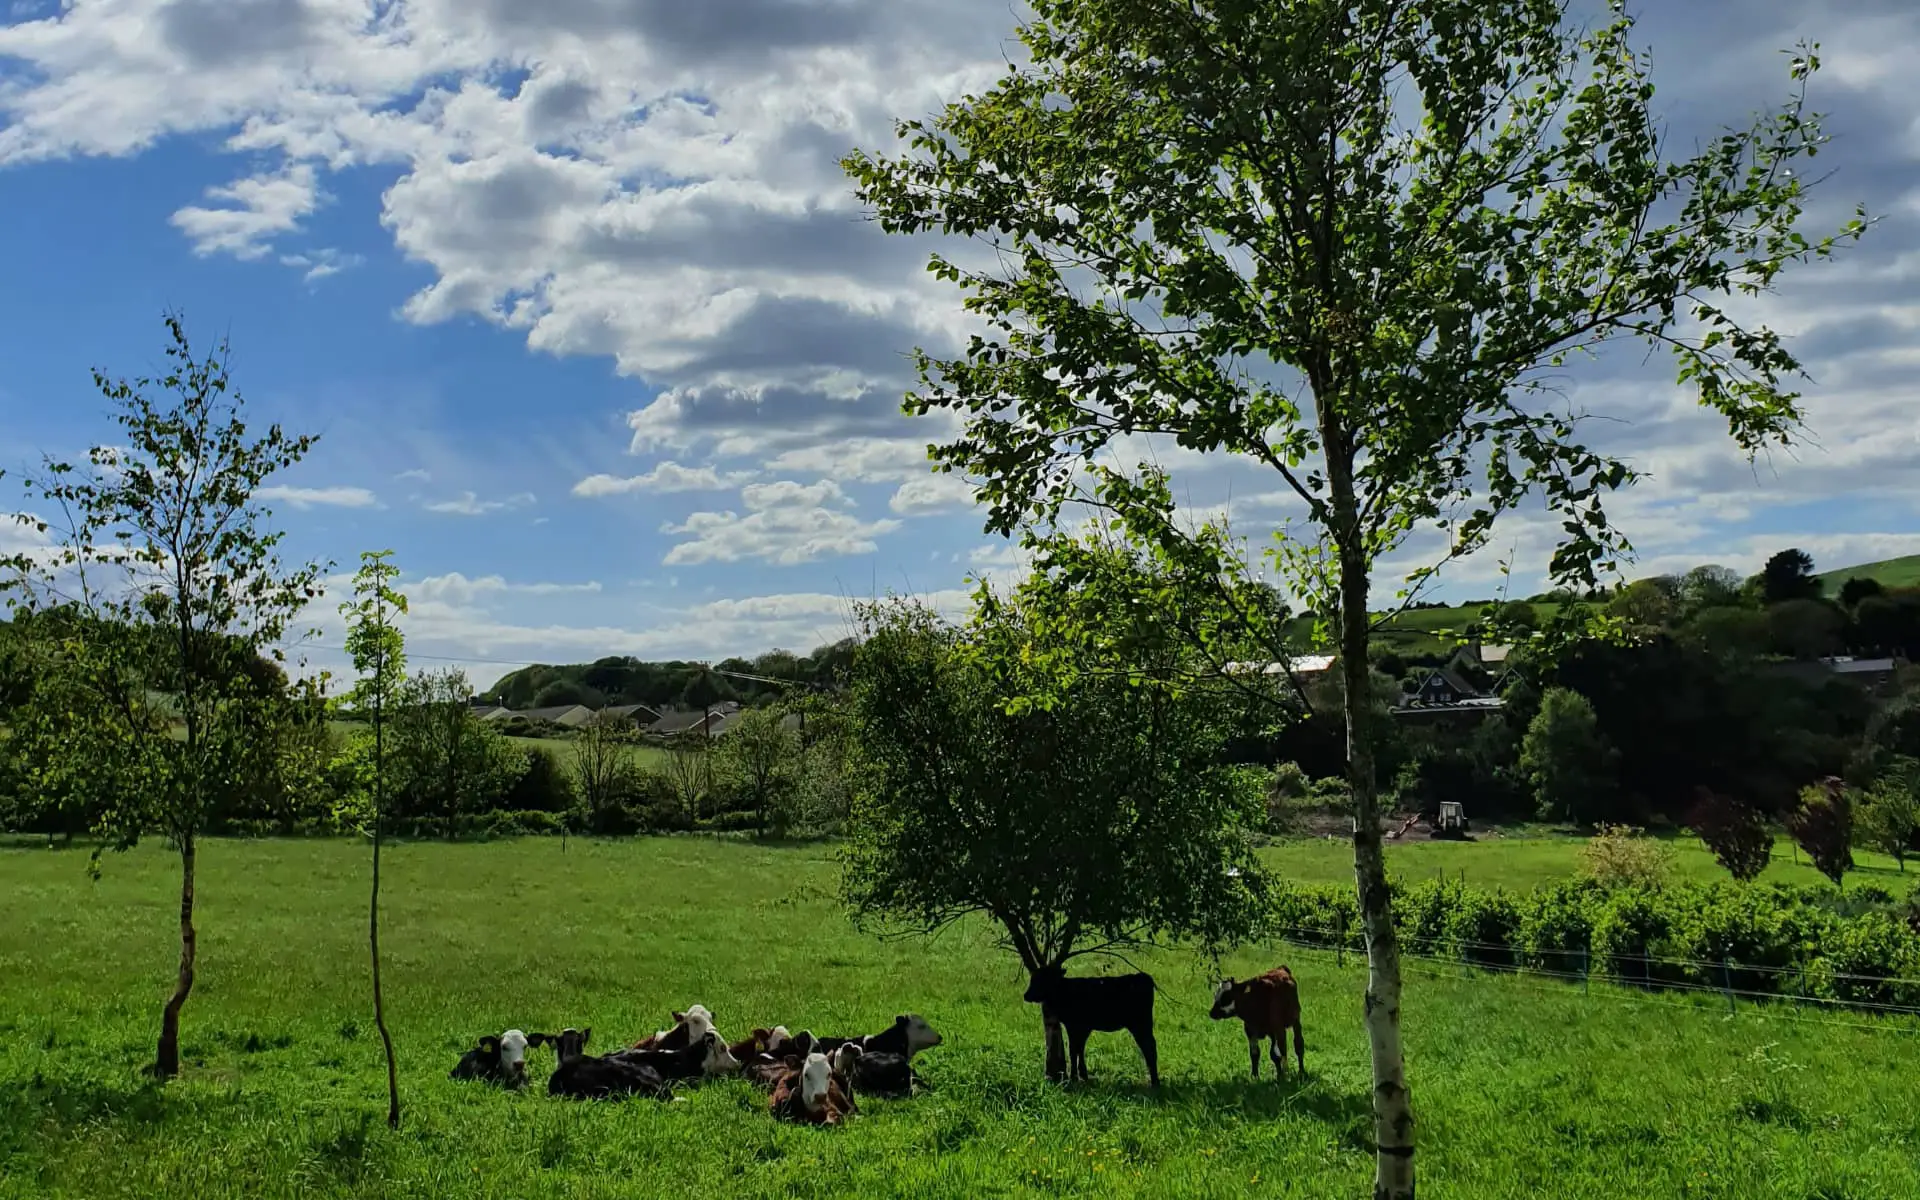 Green grass, with cows resting under shade of a tree under the blue sky and sunshine